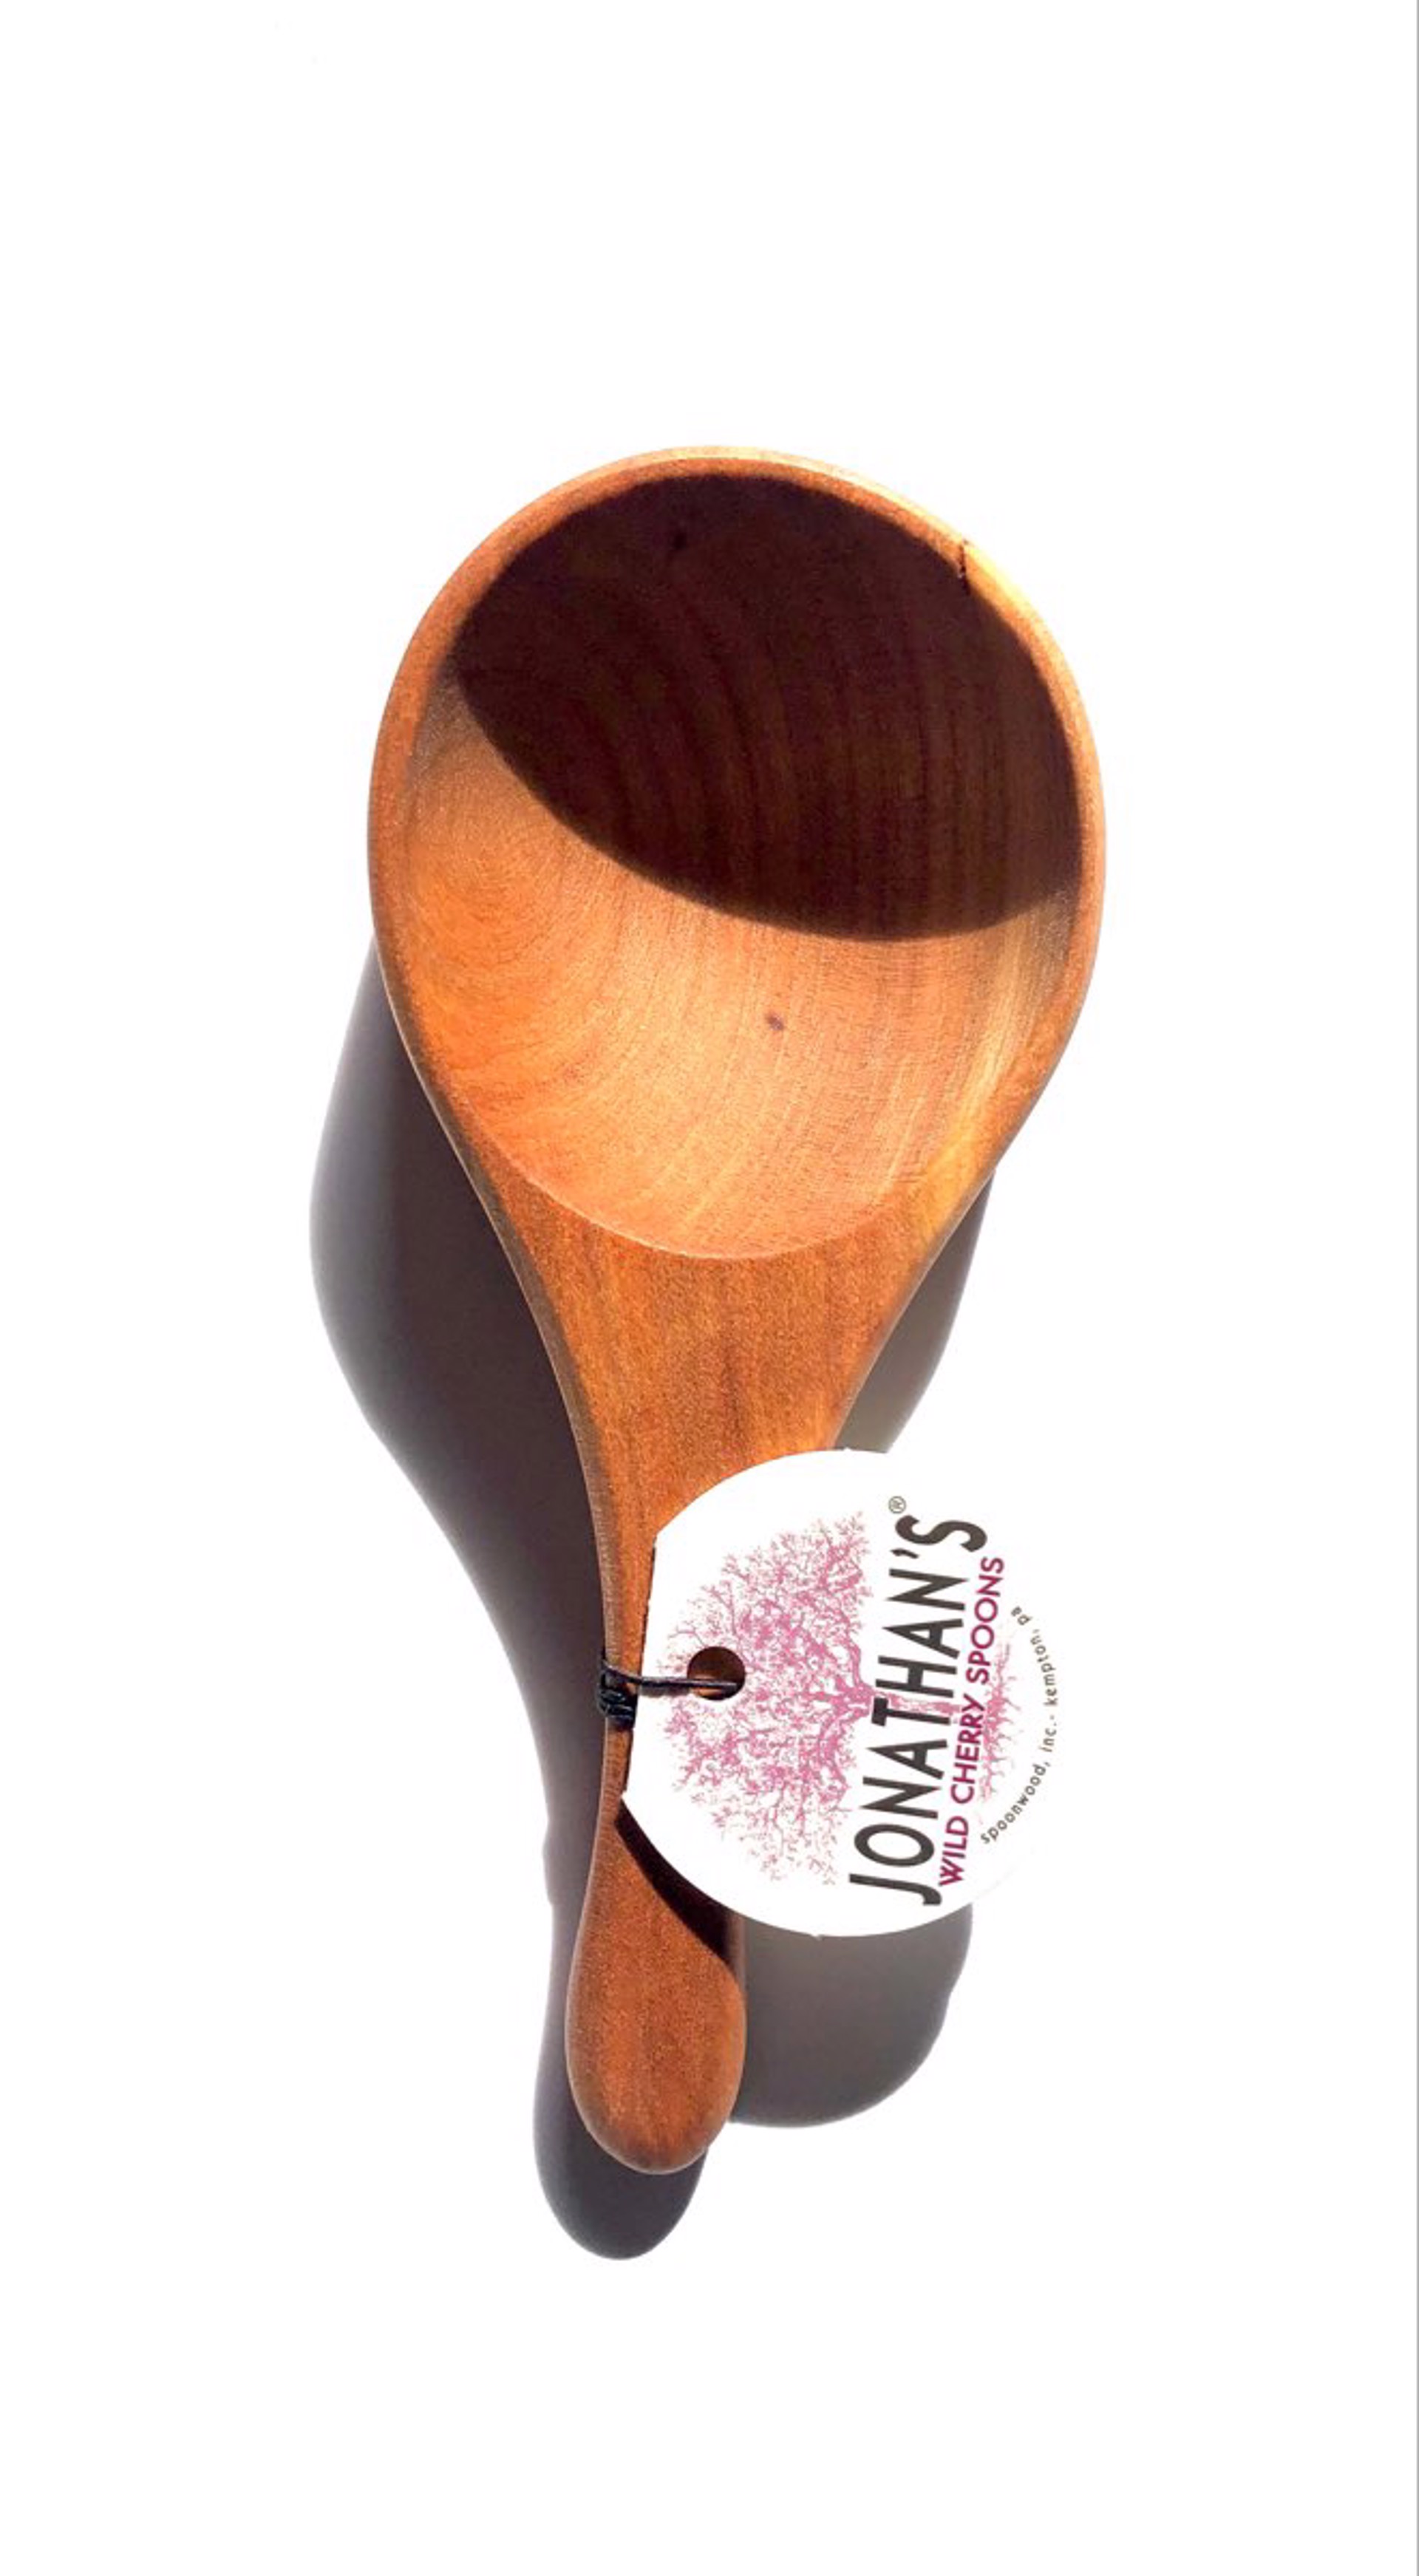 Coffee Scoop by Jonathan's Spoons